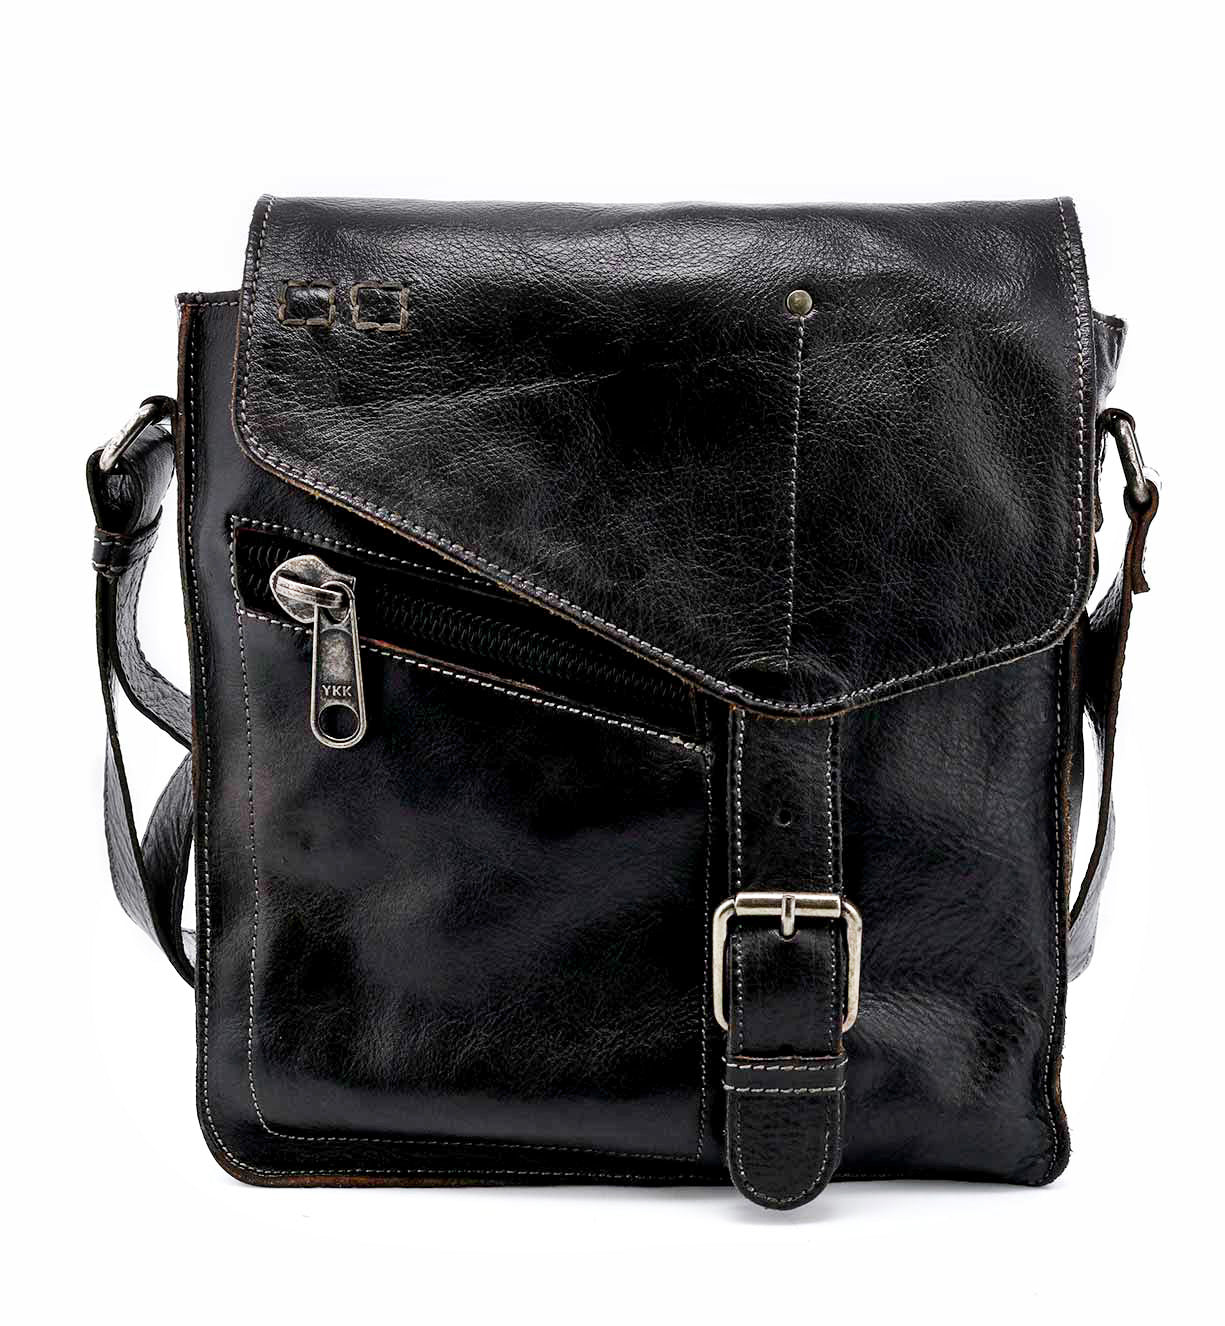 A Venice Beach black leather messenger bag with an adjustable strap, made by Bed Stu.